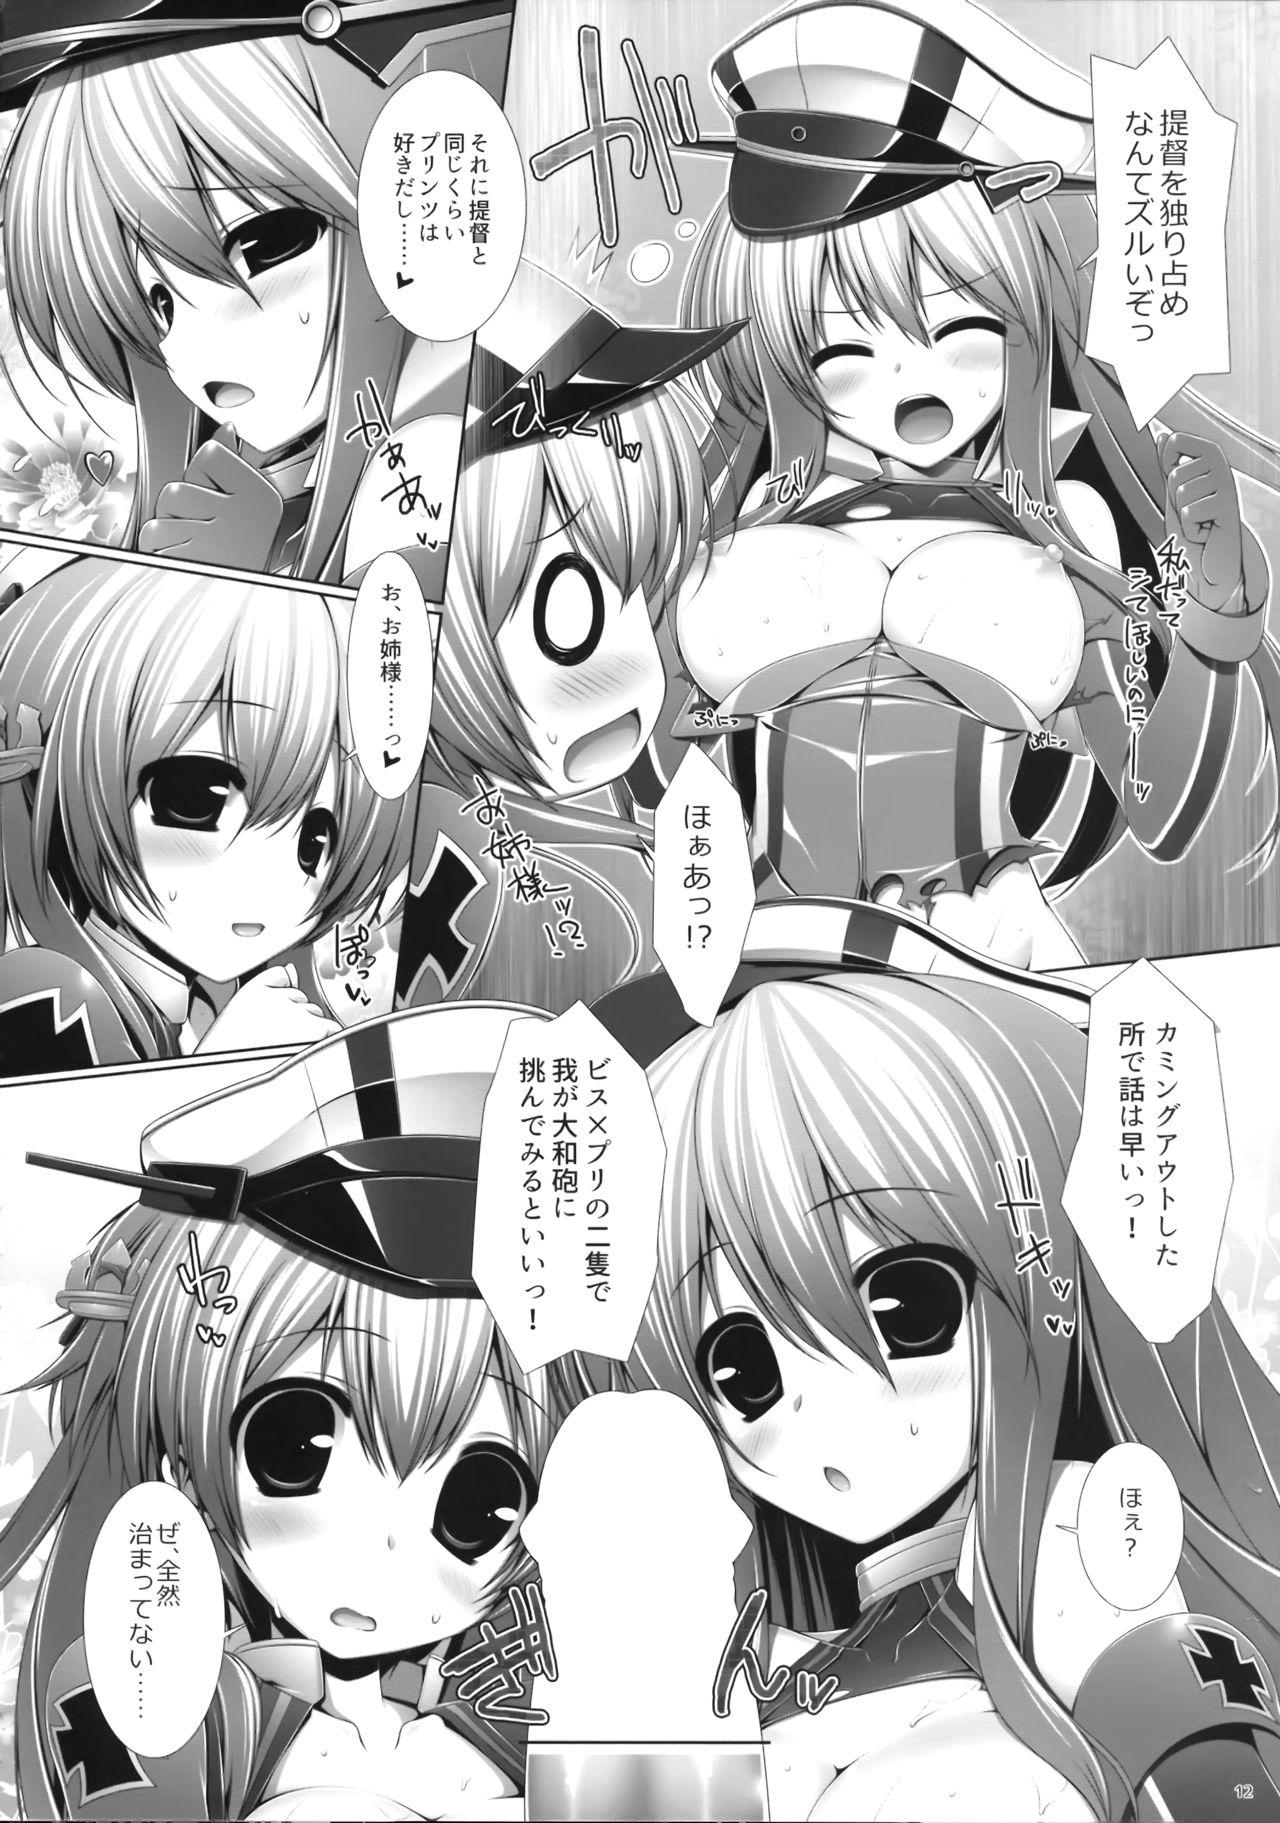 Classy Night battle ship girls - Kantai collection Lesbians - Page 11